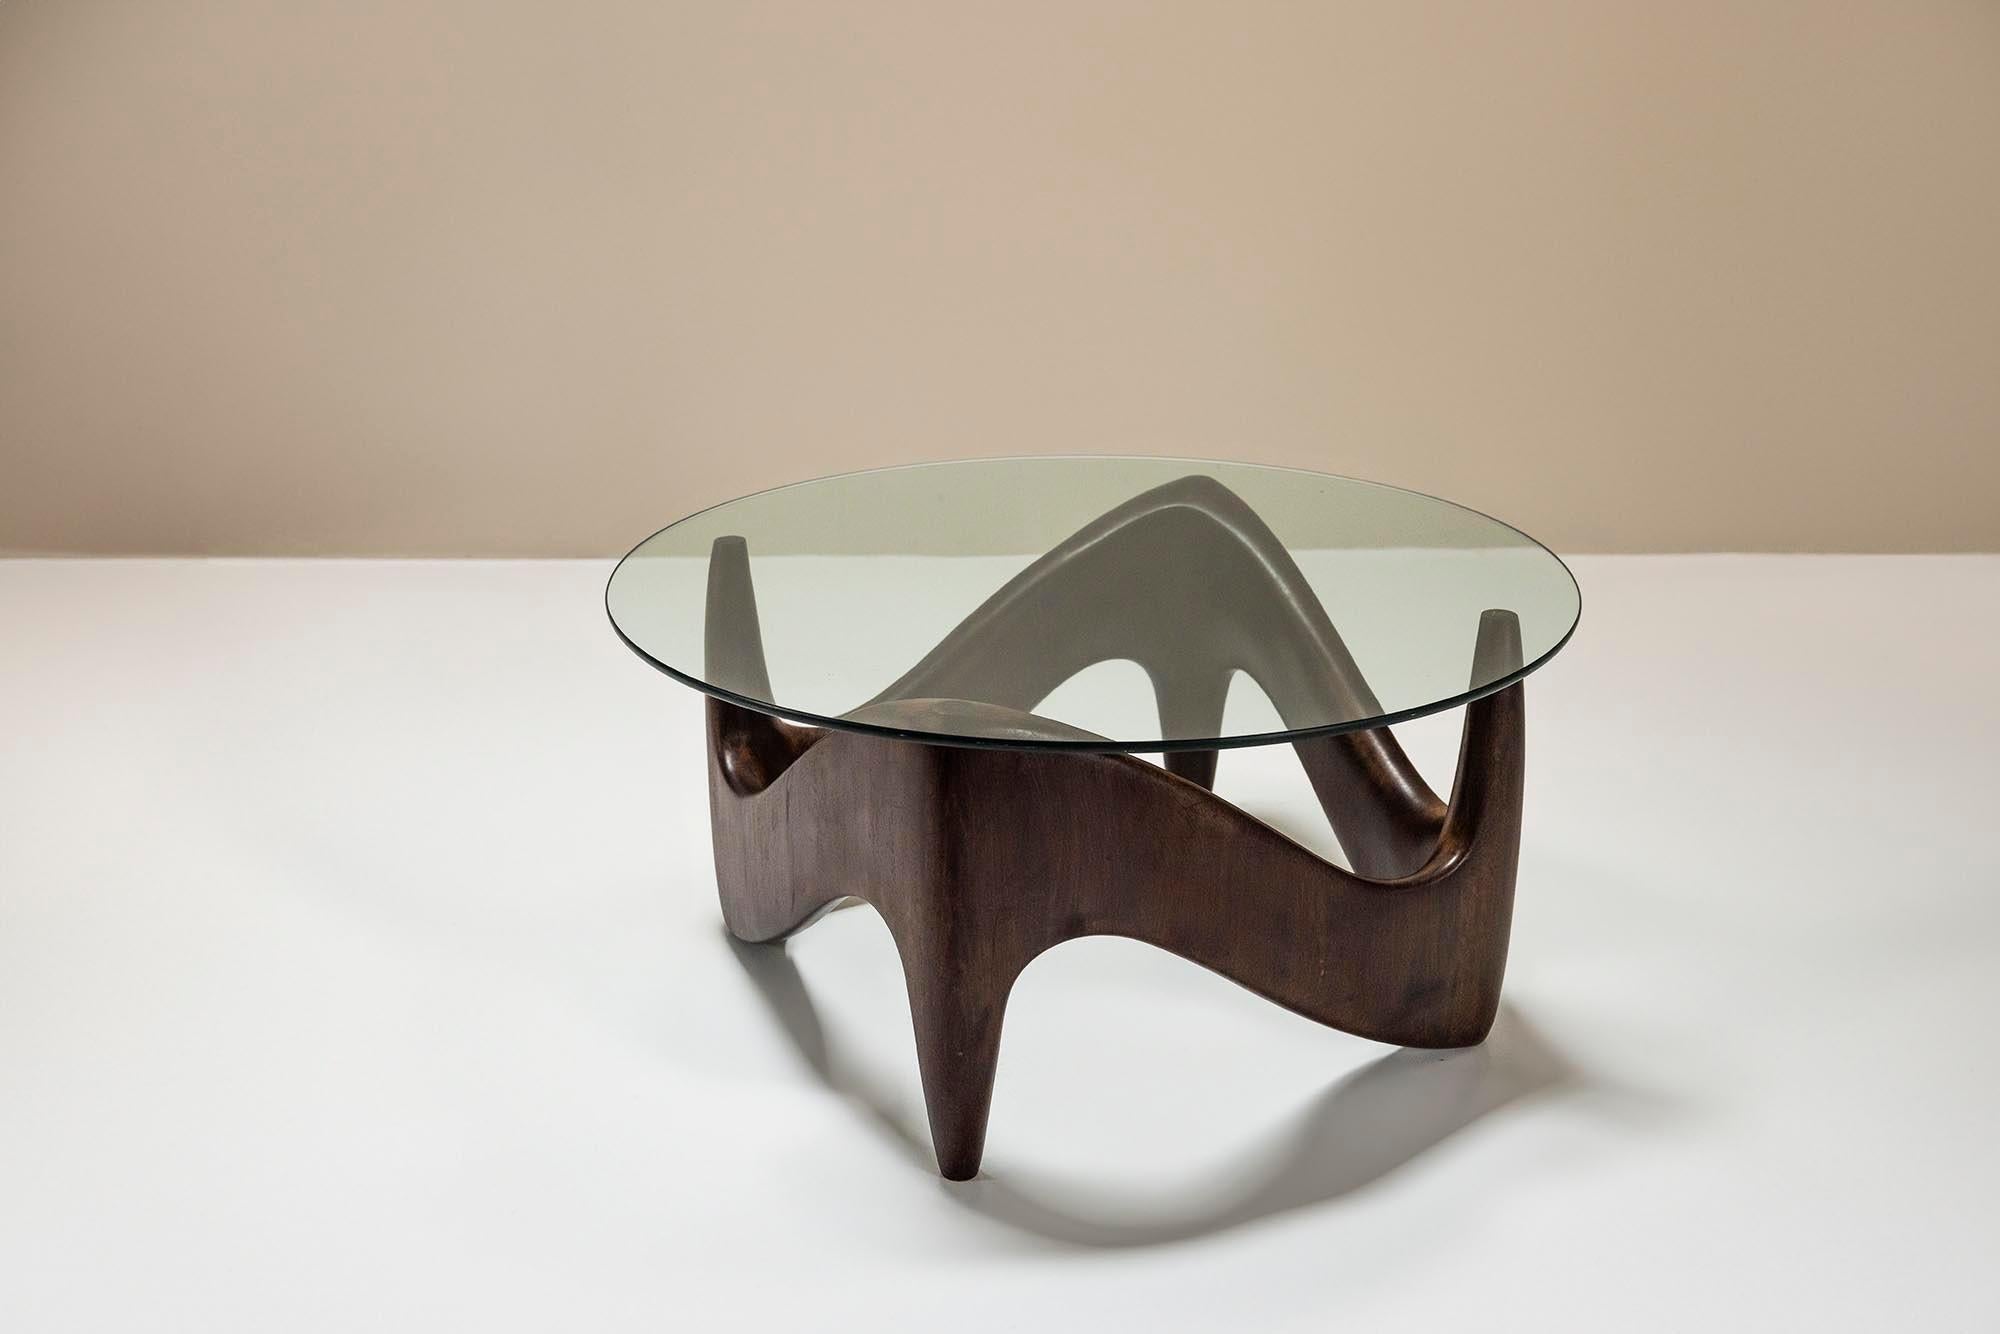 Sculptural and organic-shaped coffee table with a wooden base and glass top. The playful design is a combination of a square-shaped base, although when you look differently at it, it can also look as a triangle, the organic flow of the wood and the